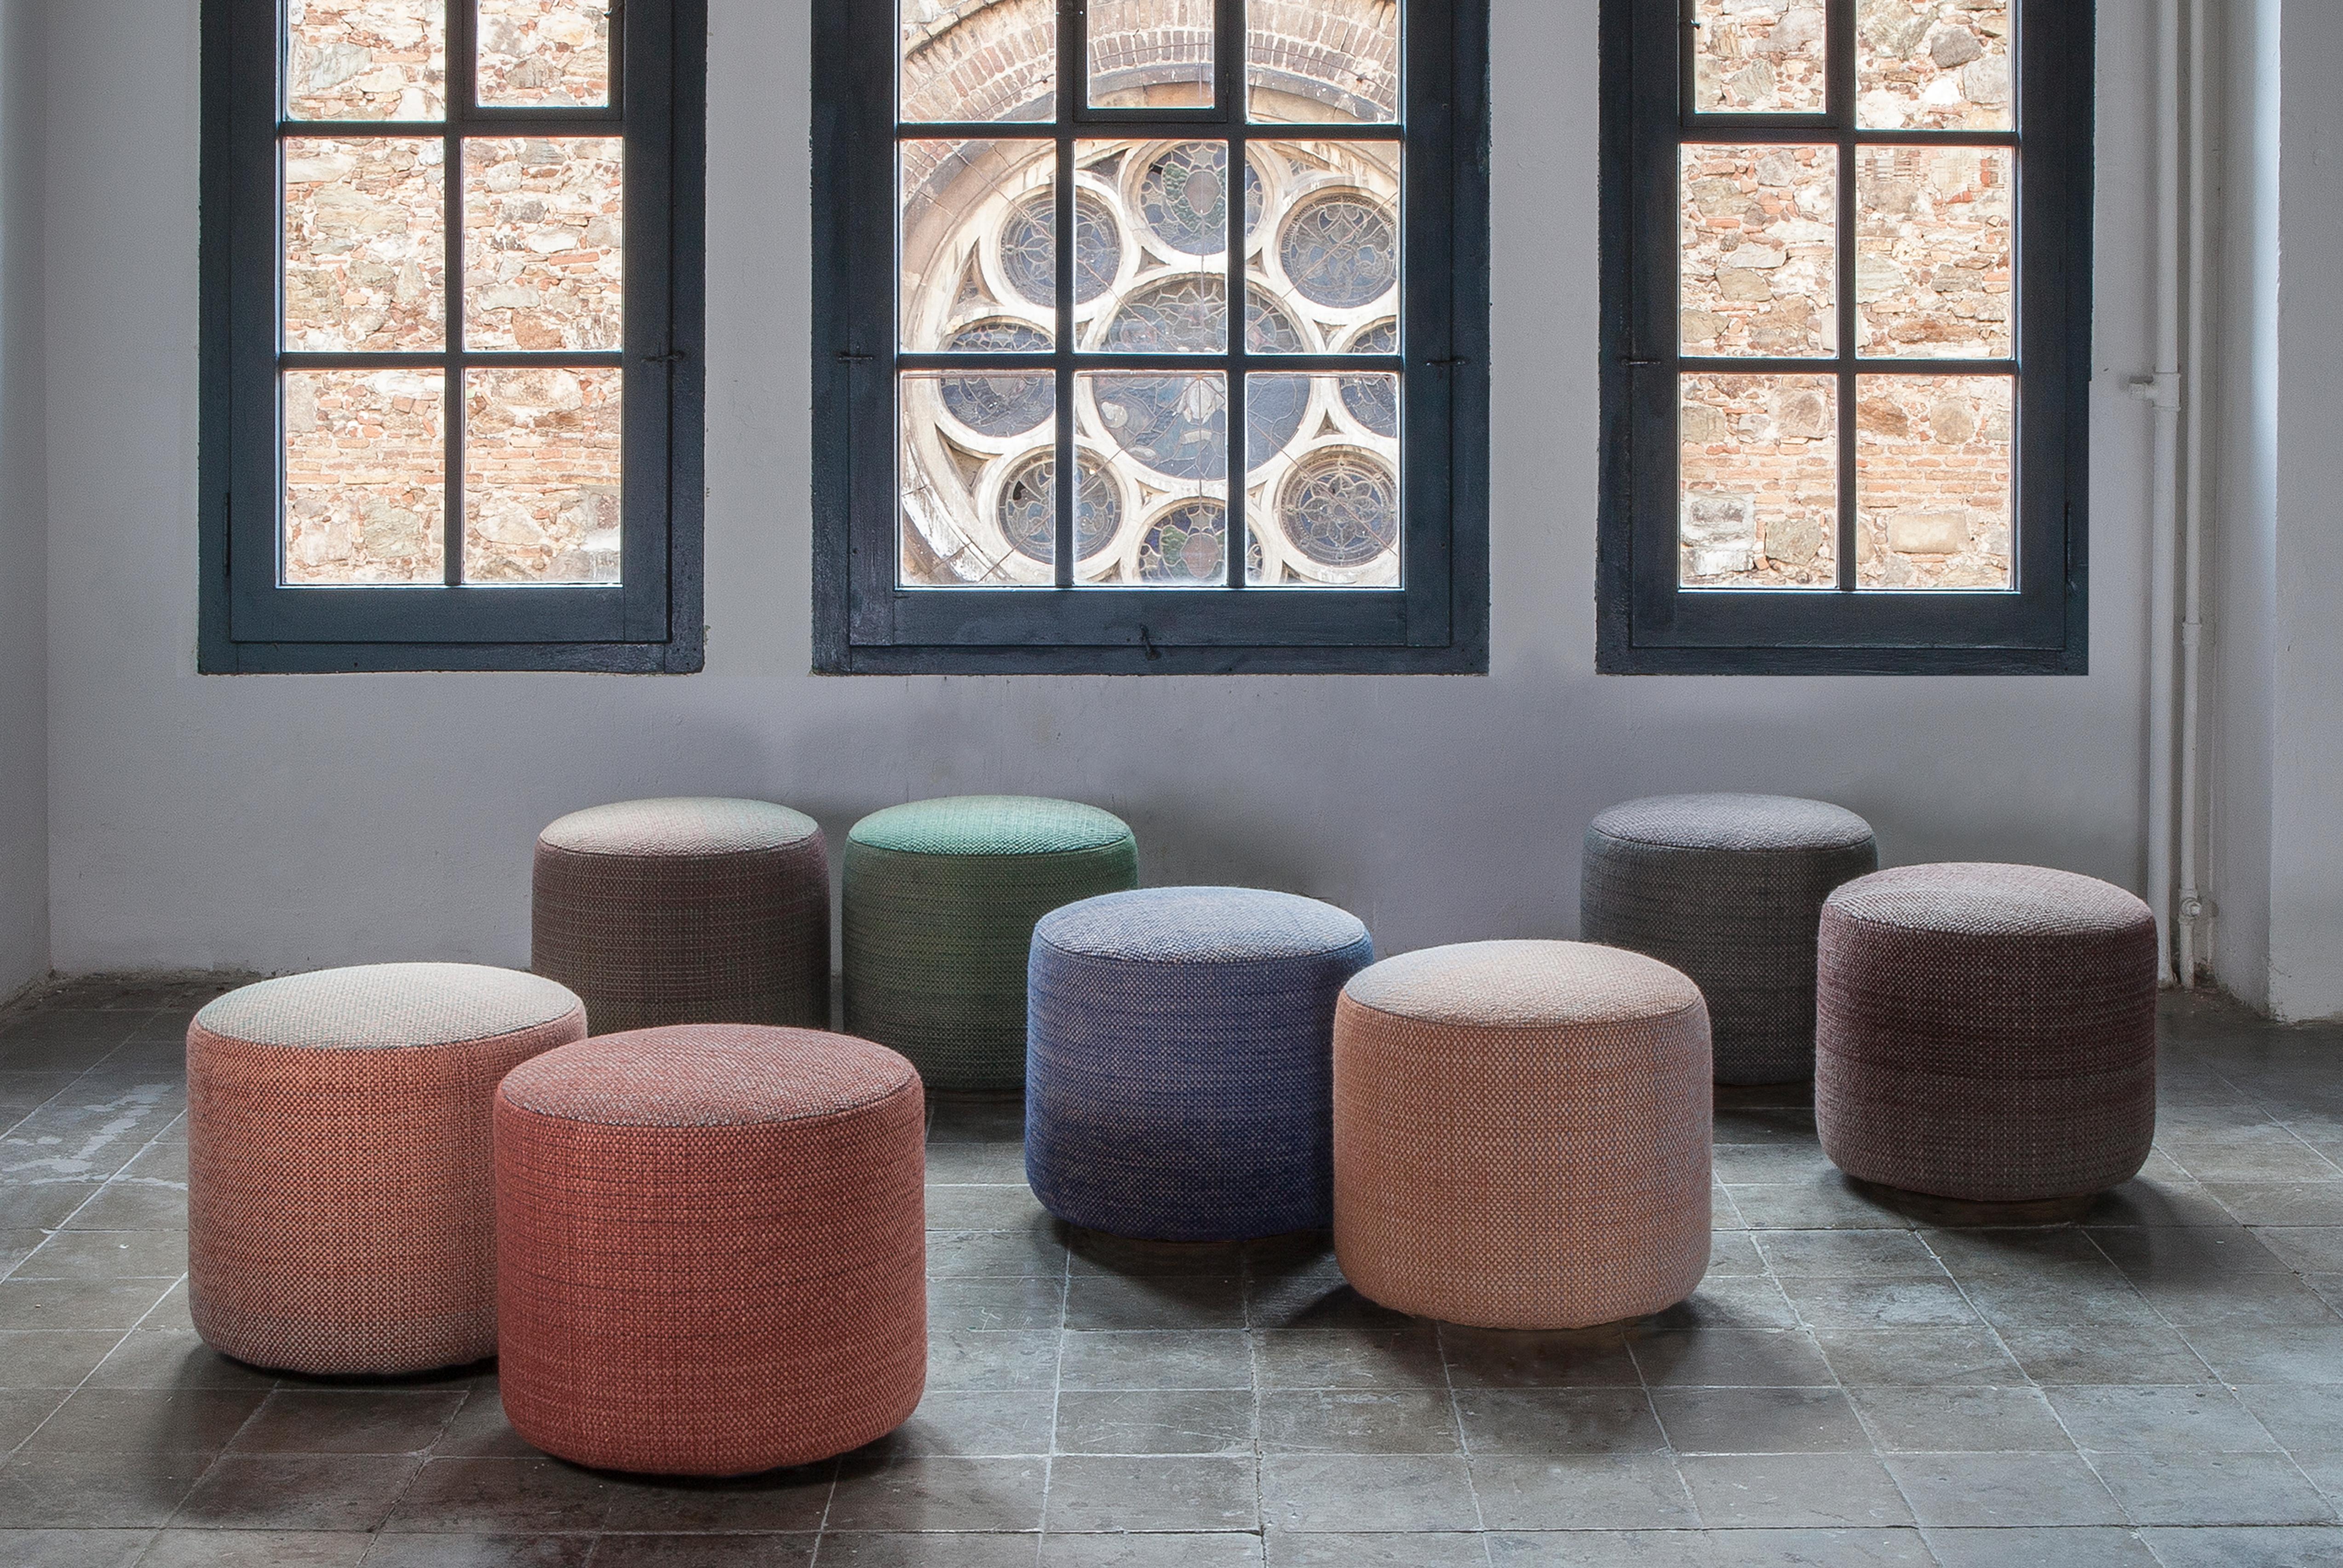 The collection of Shade poufs is born to complement one of our most successful collections. And as the original rug models are inspired by magical moments in nature where colors melt and speak for themselves. Shade palettes achieve an intricate